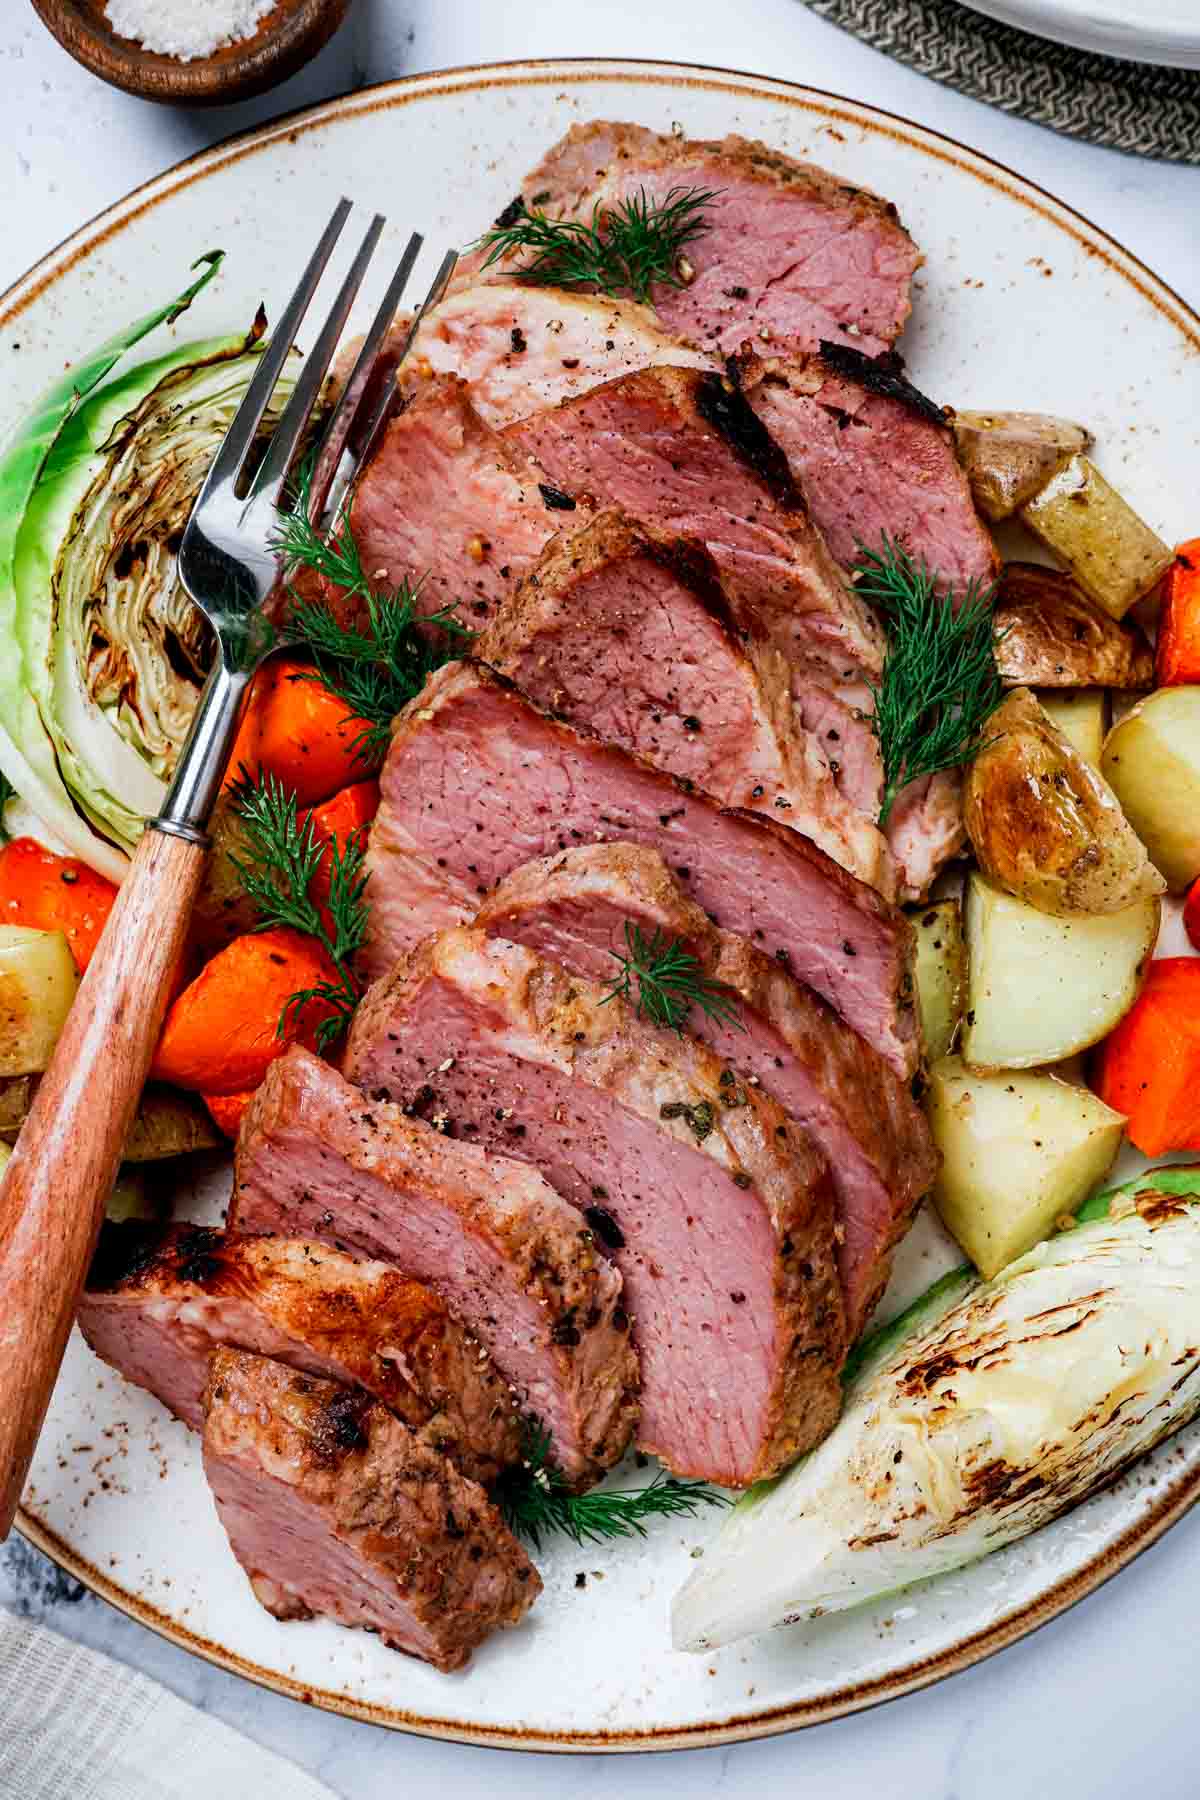 https://www.wenthere8this.com/wp-content/uploads/2023/03/sous-vide-corned-beef-1.jpg